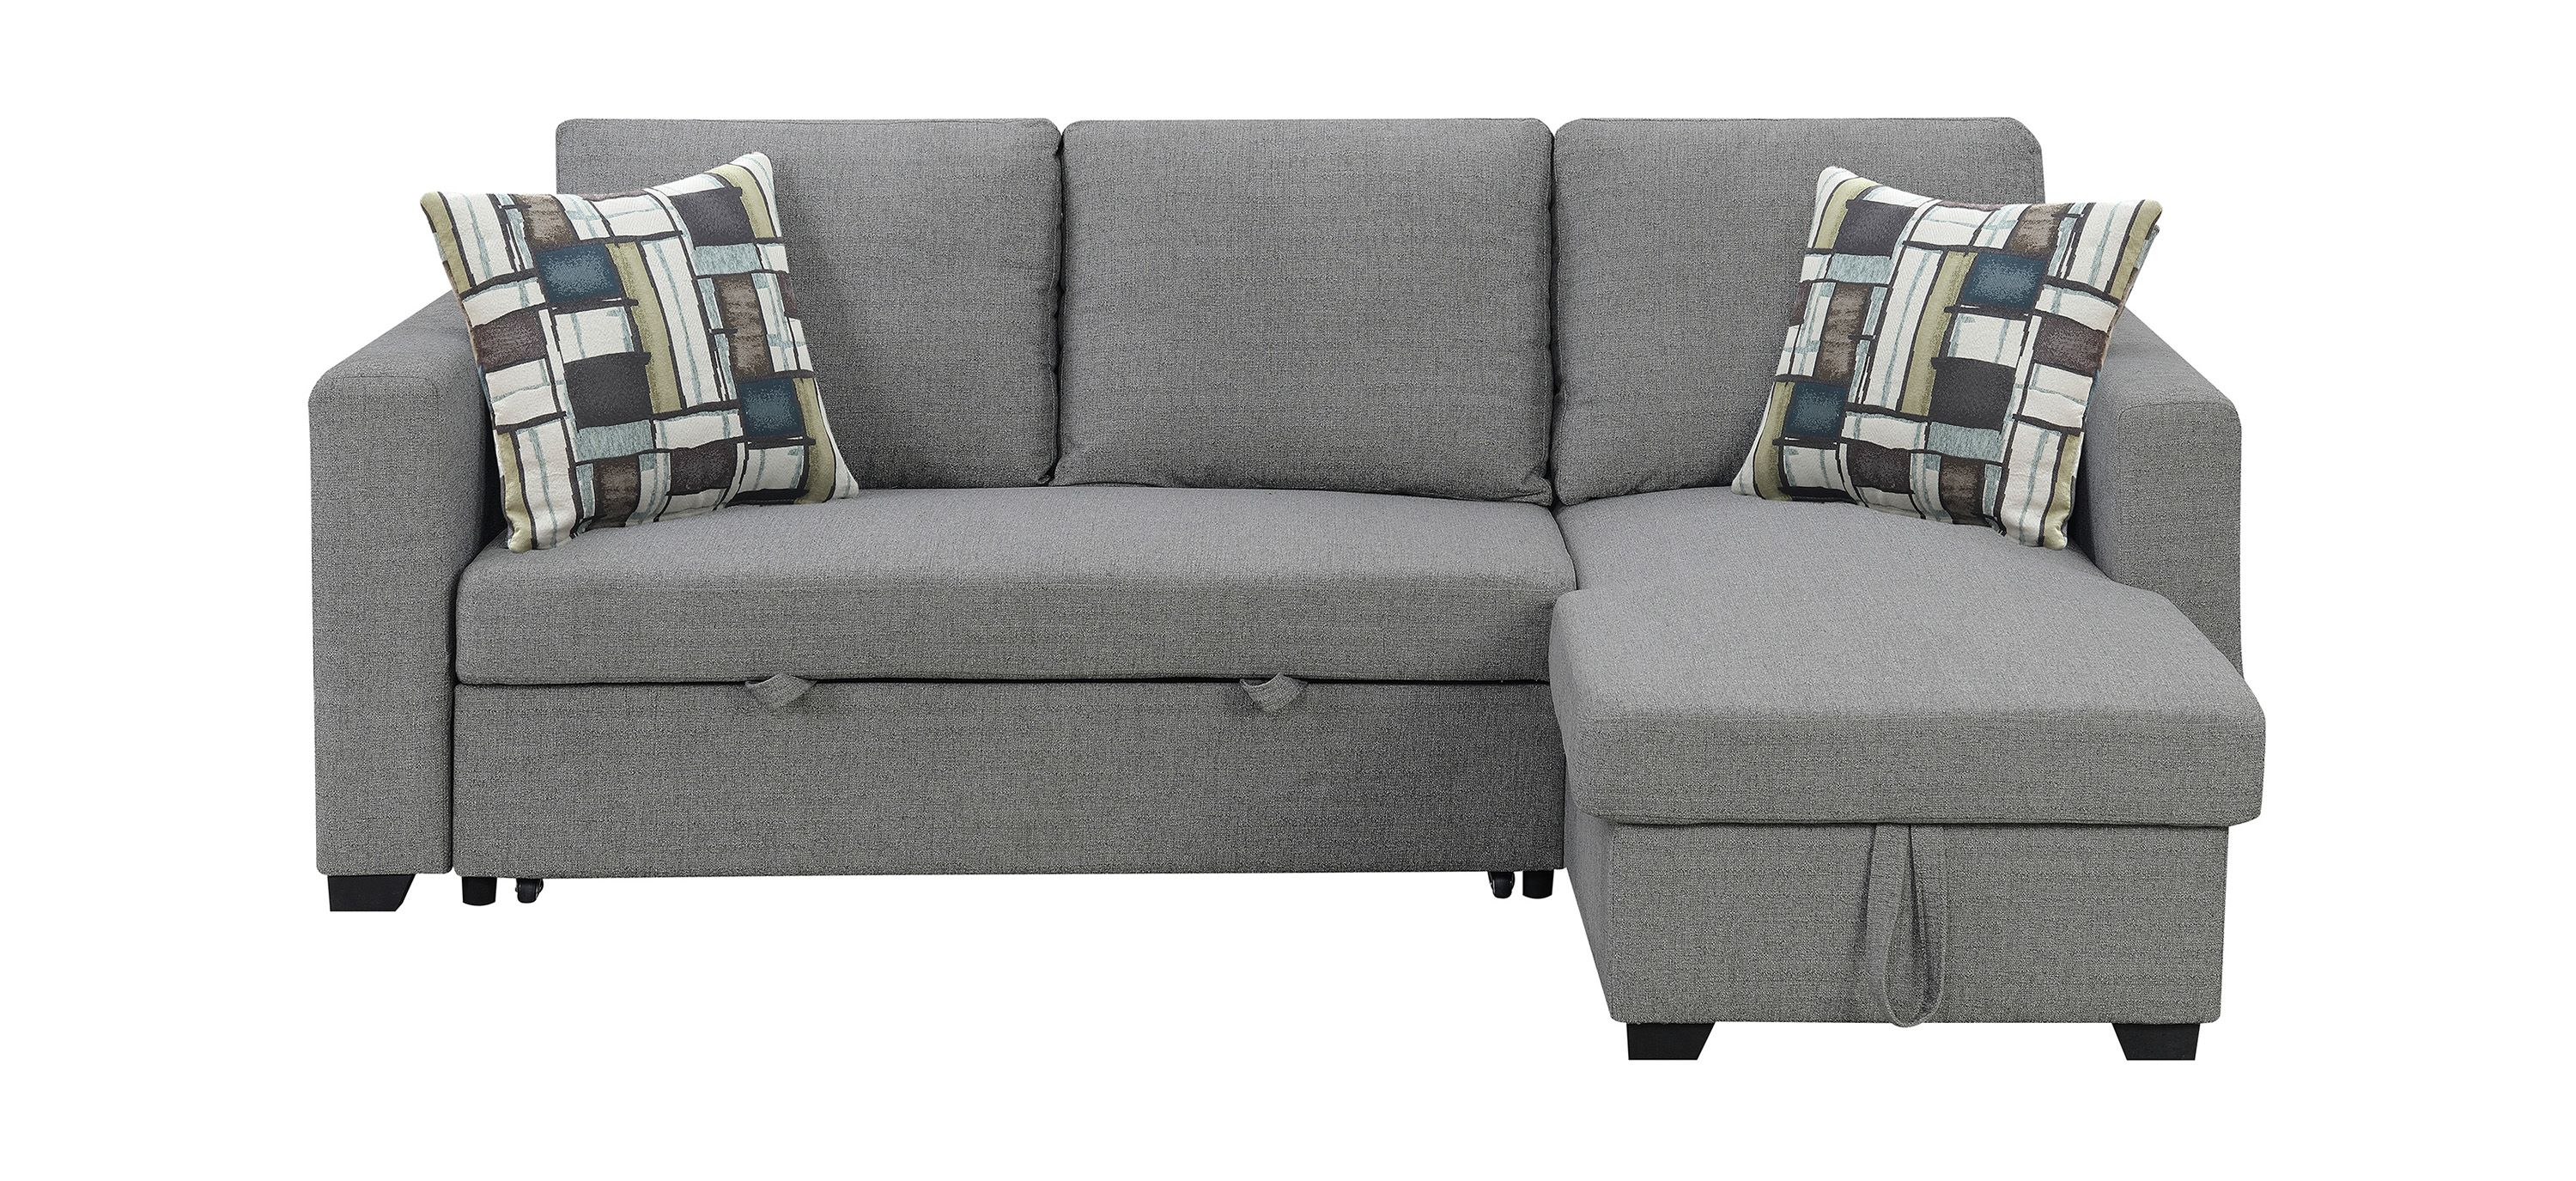 Langley Reversible Pop-Up Sleeper Sectional